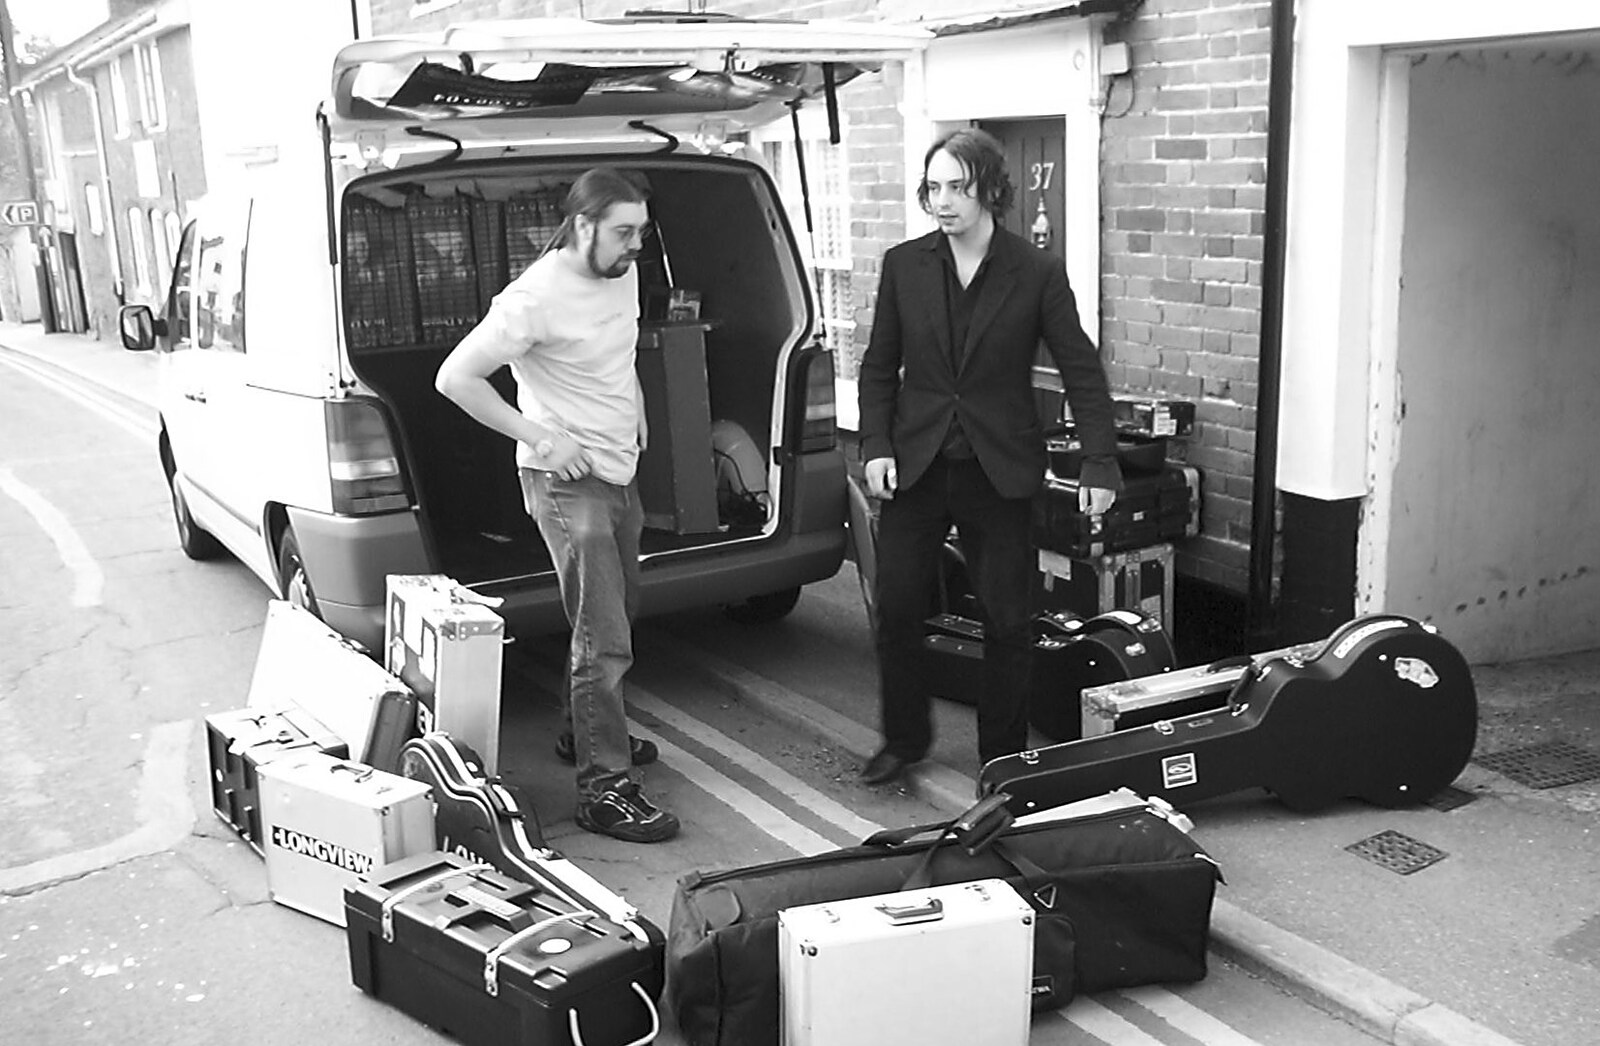 Loading up the gear into a van on Chapel Street from Longview play Revolution Records, Diss, Norfolk - 2nd July 2004